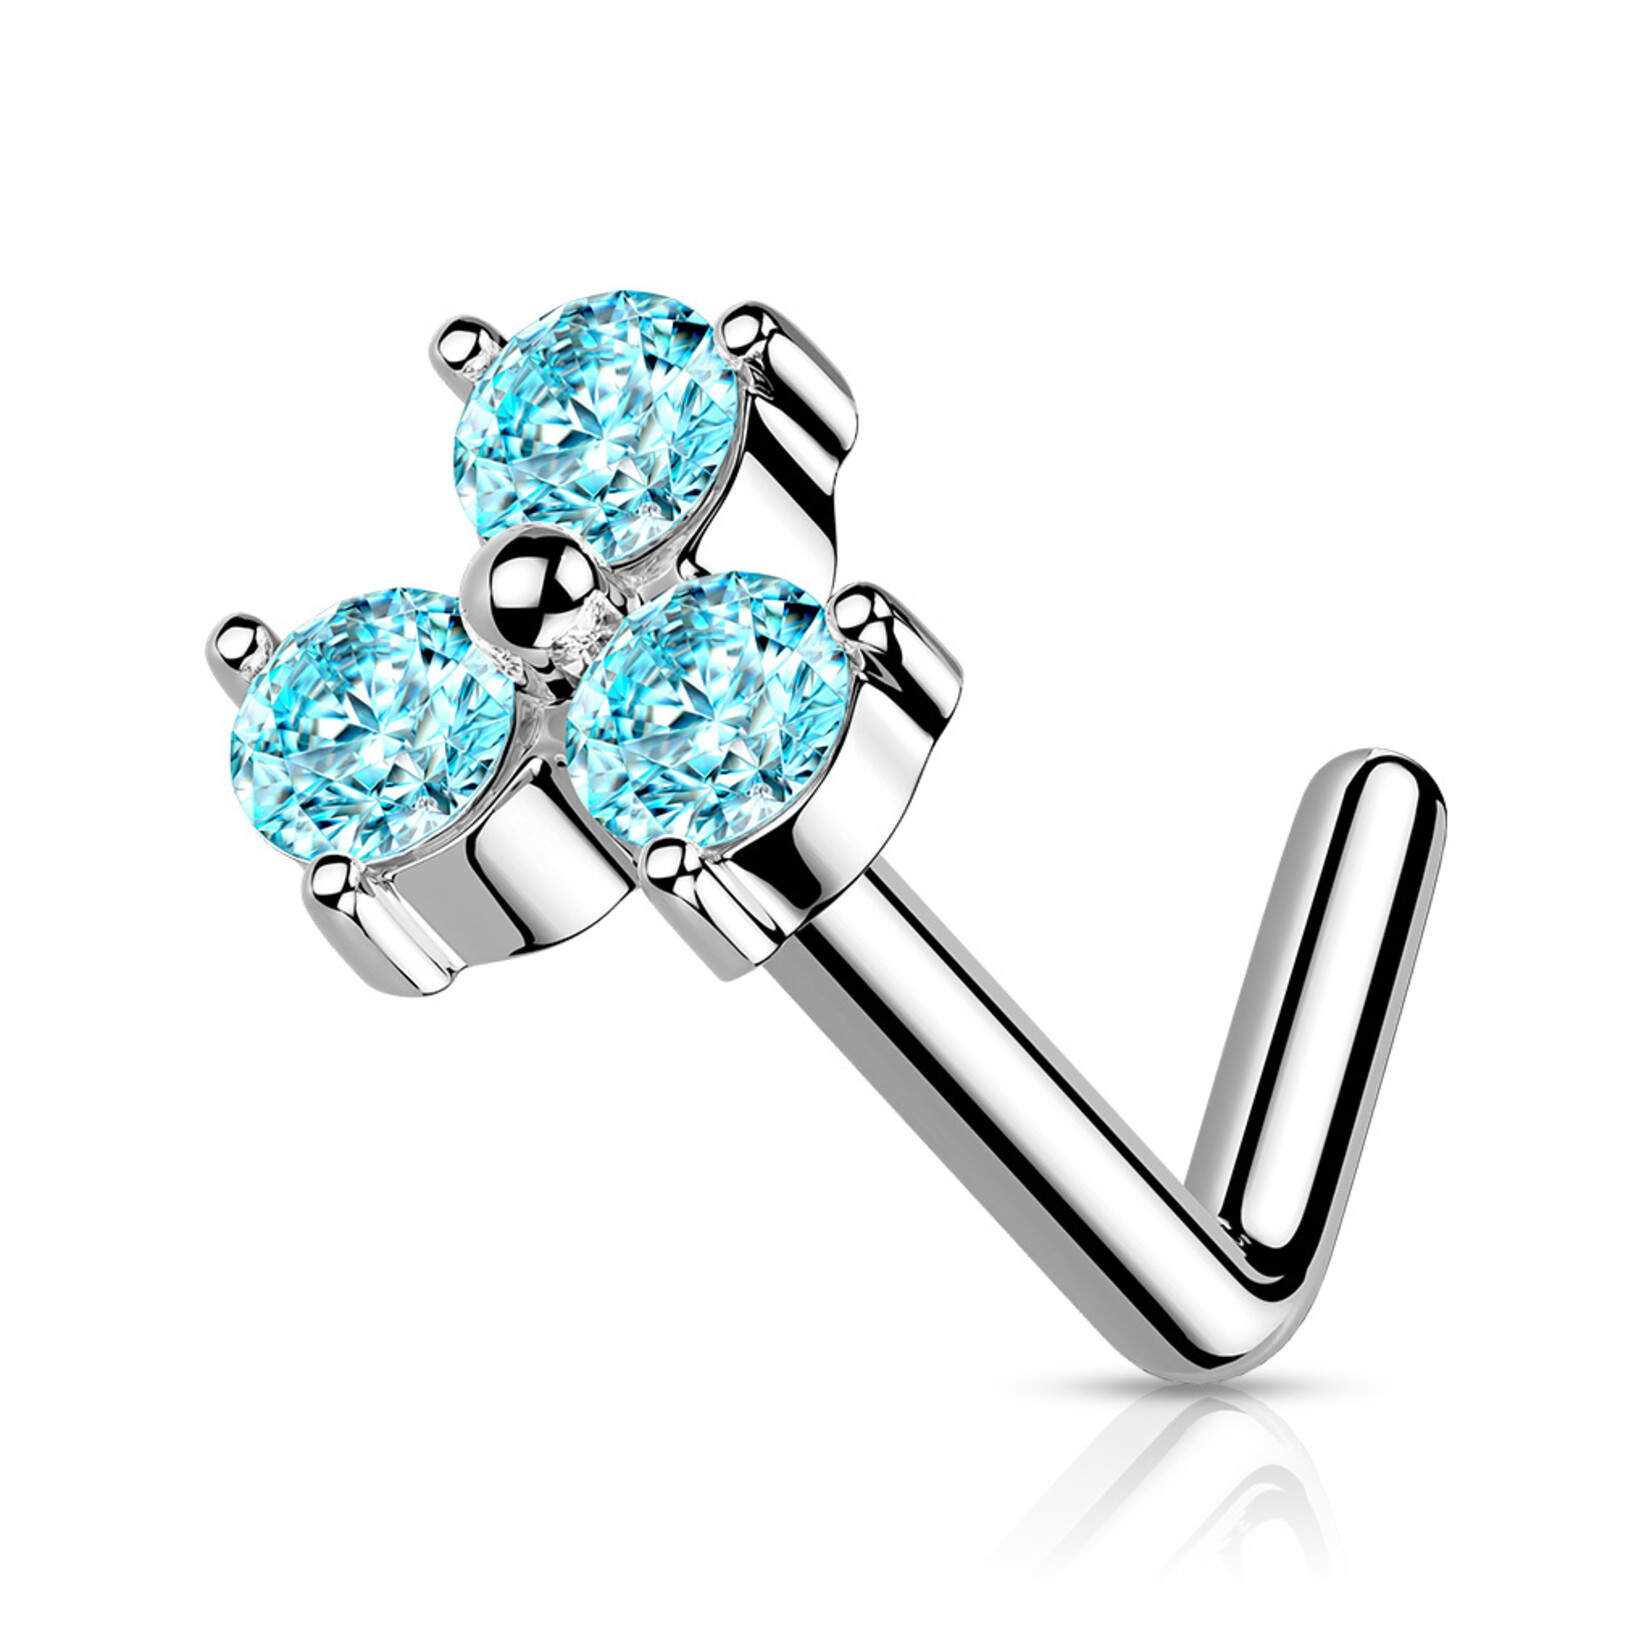 Hollywood Body Jewelry Three Crystal L Bend Nose Stud